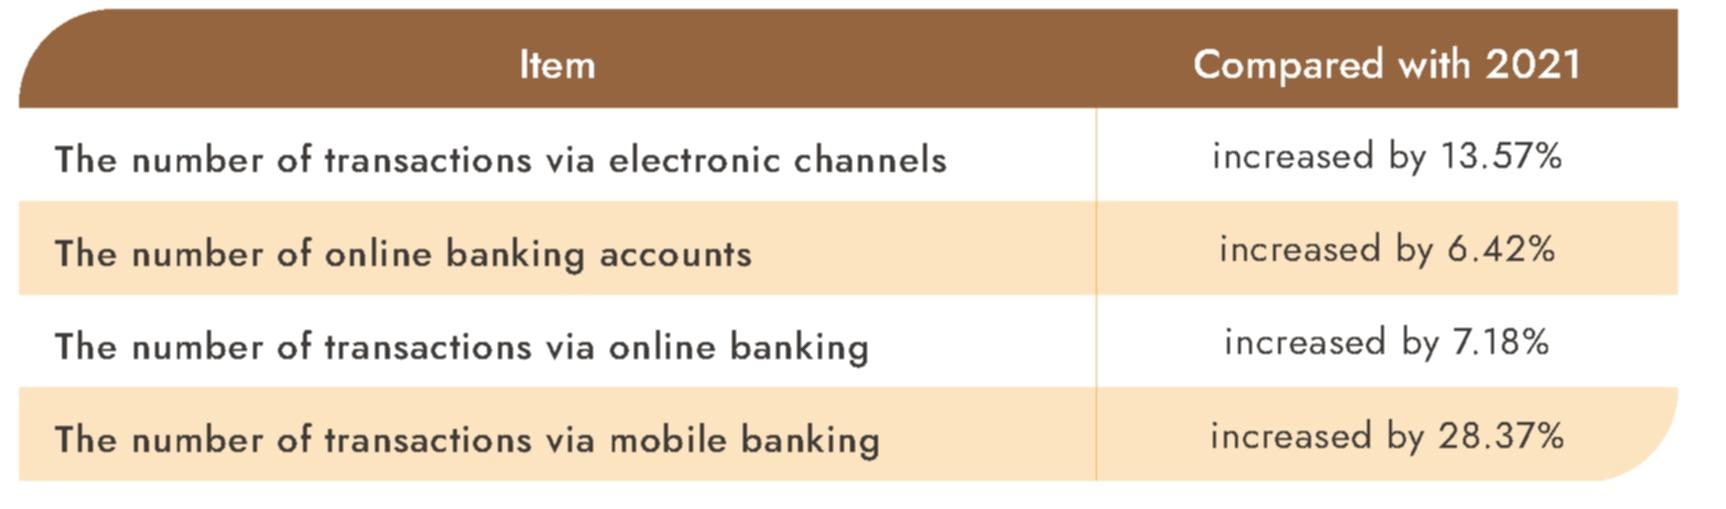 Motivate customers to use transaction via electronic channels.Status of usage of electronic channels in 2022: